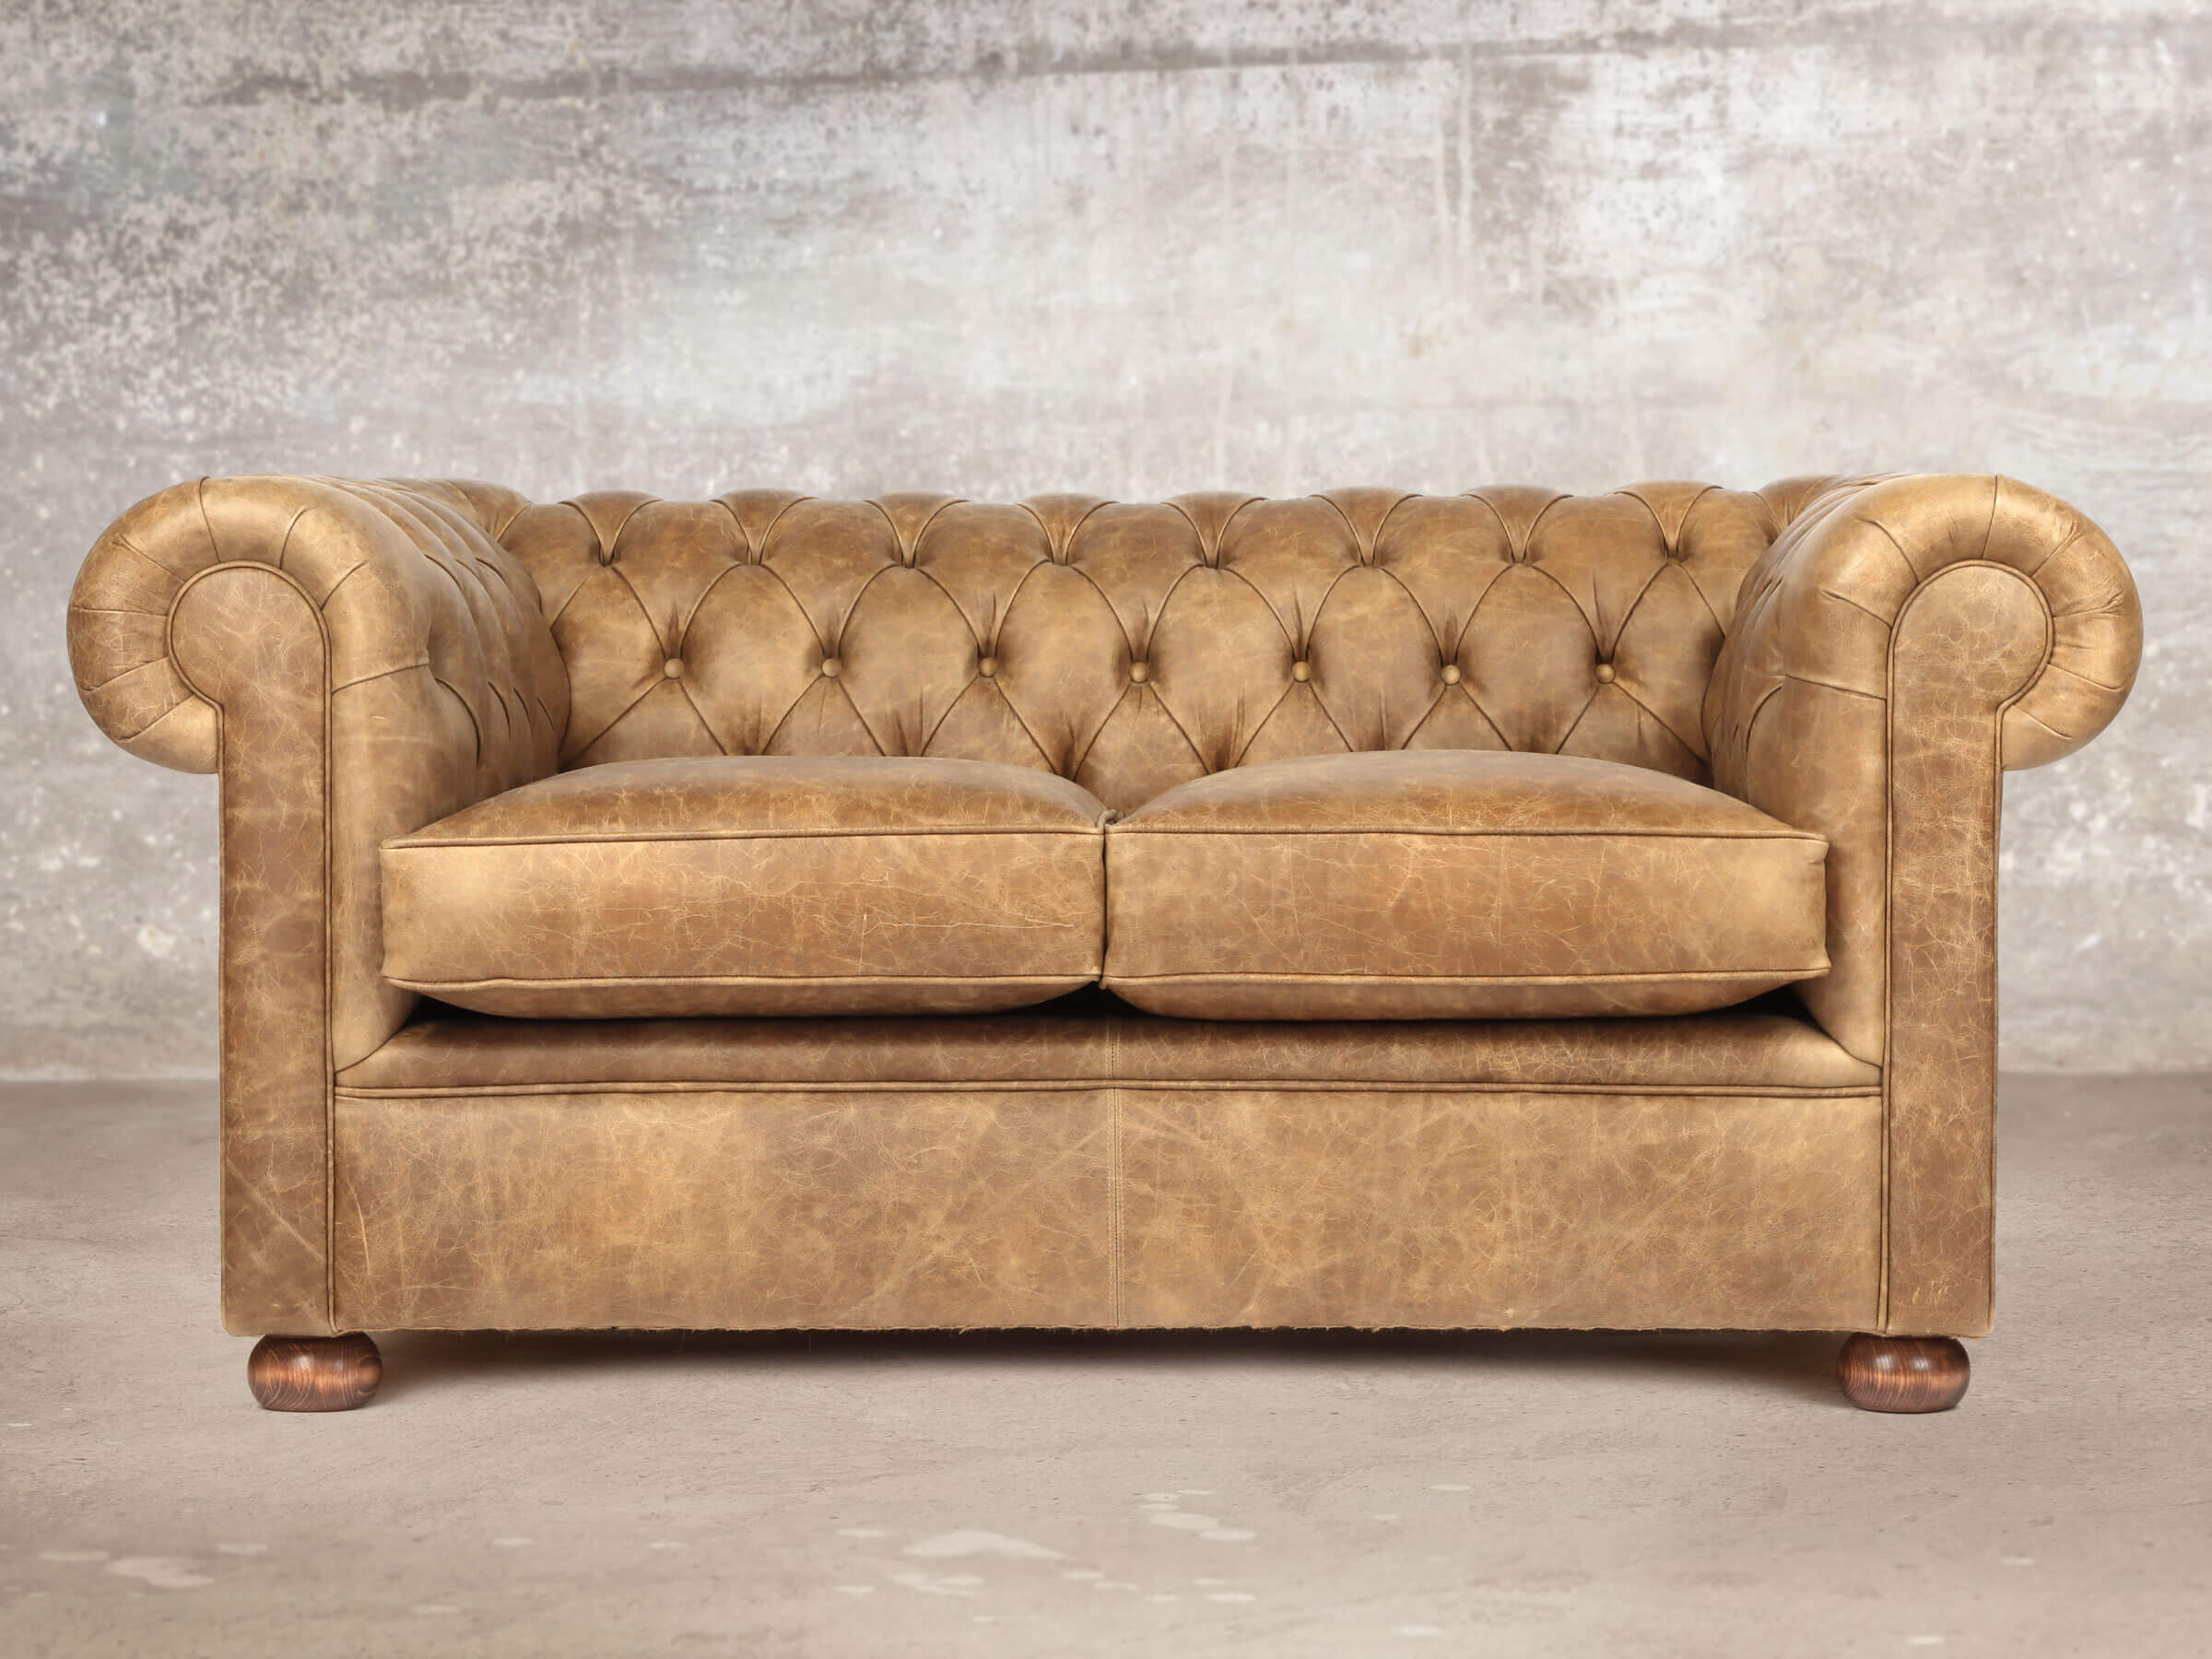 Distressed Leather Chesterfield Furniture